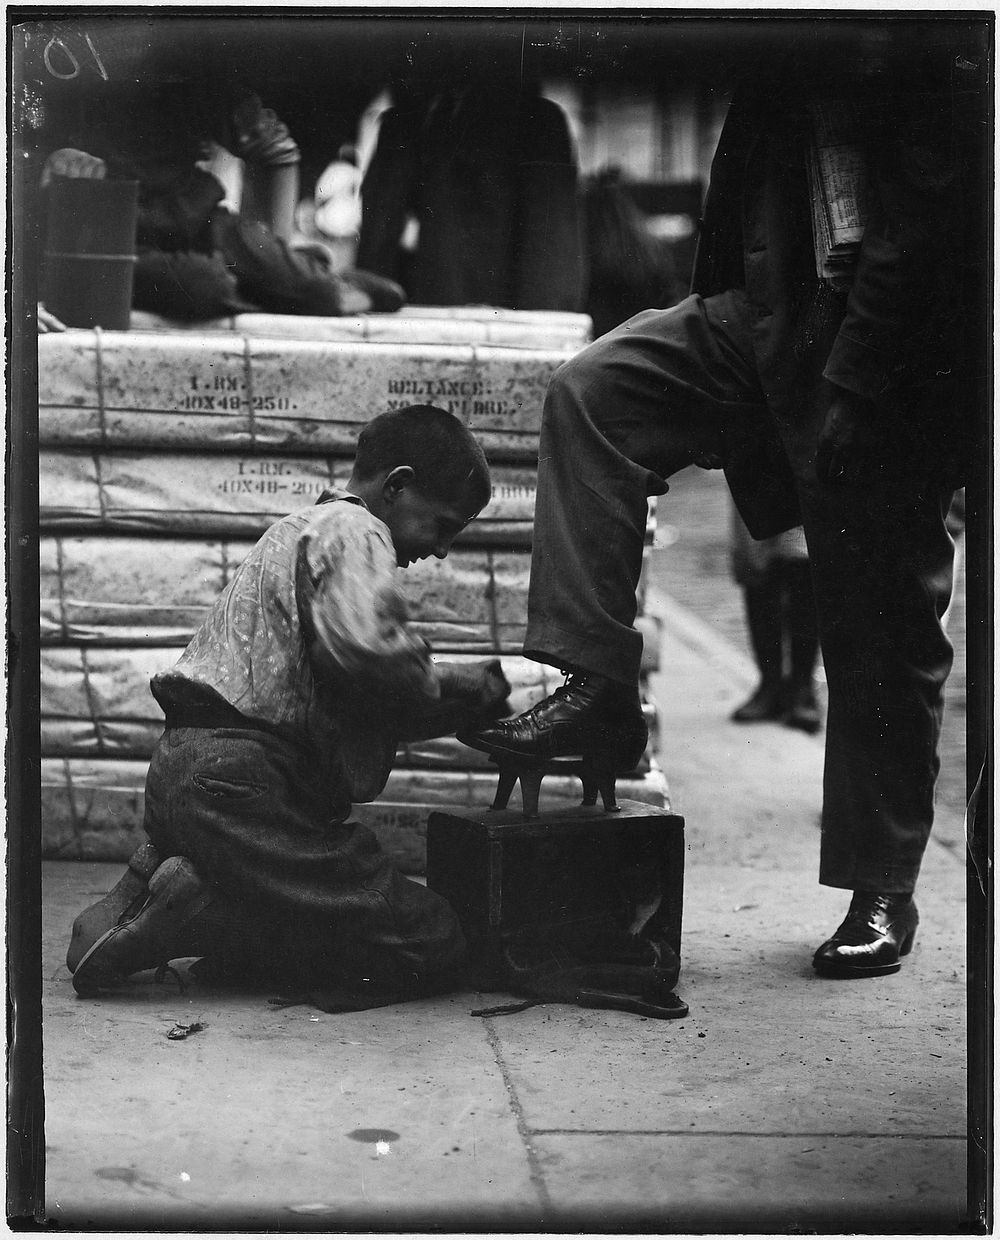 Bowery bootblack. New York City, June 1910. Photographer: Hine, Lewis. Original public domain image from Flickr